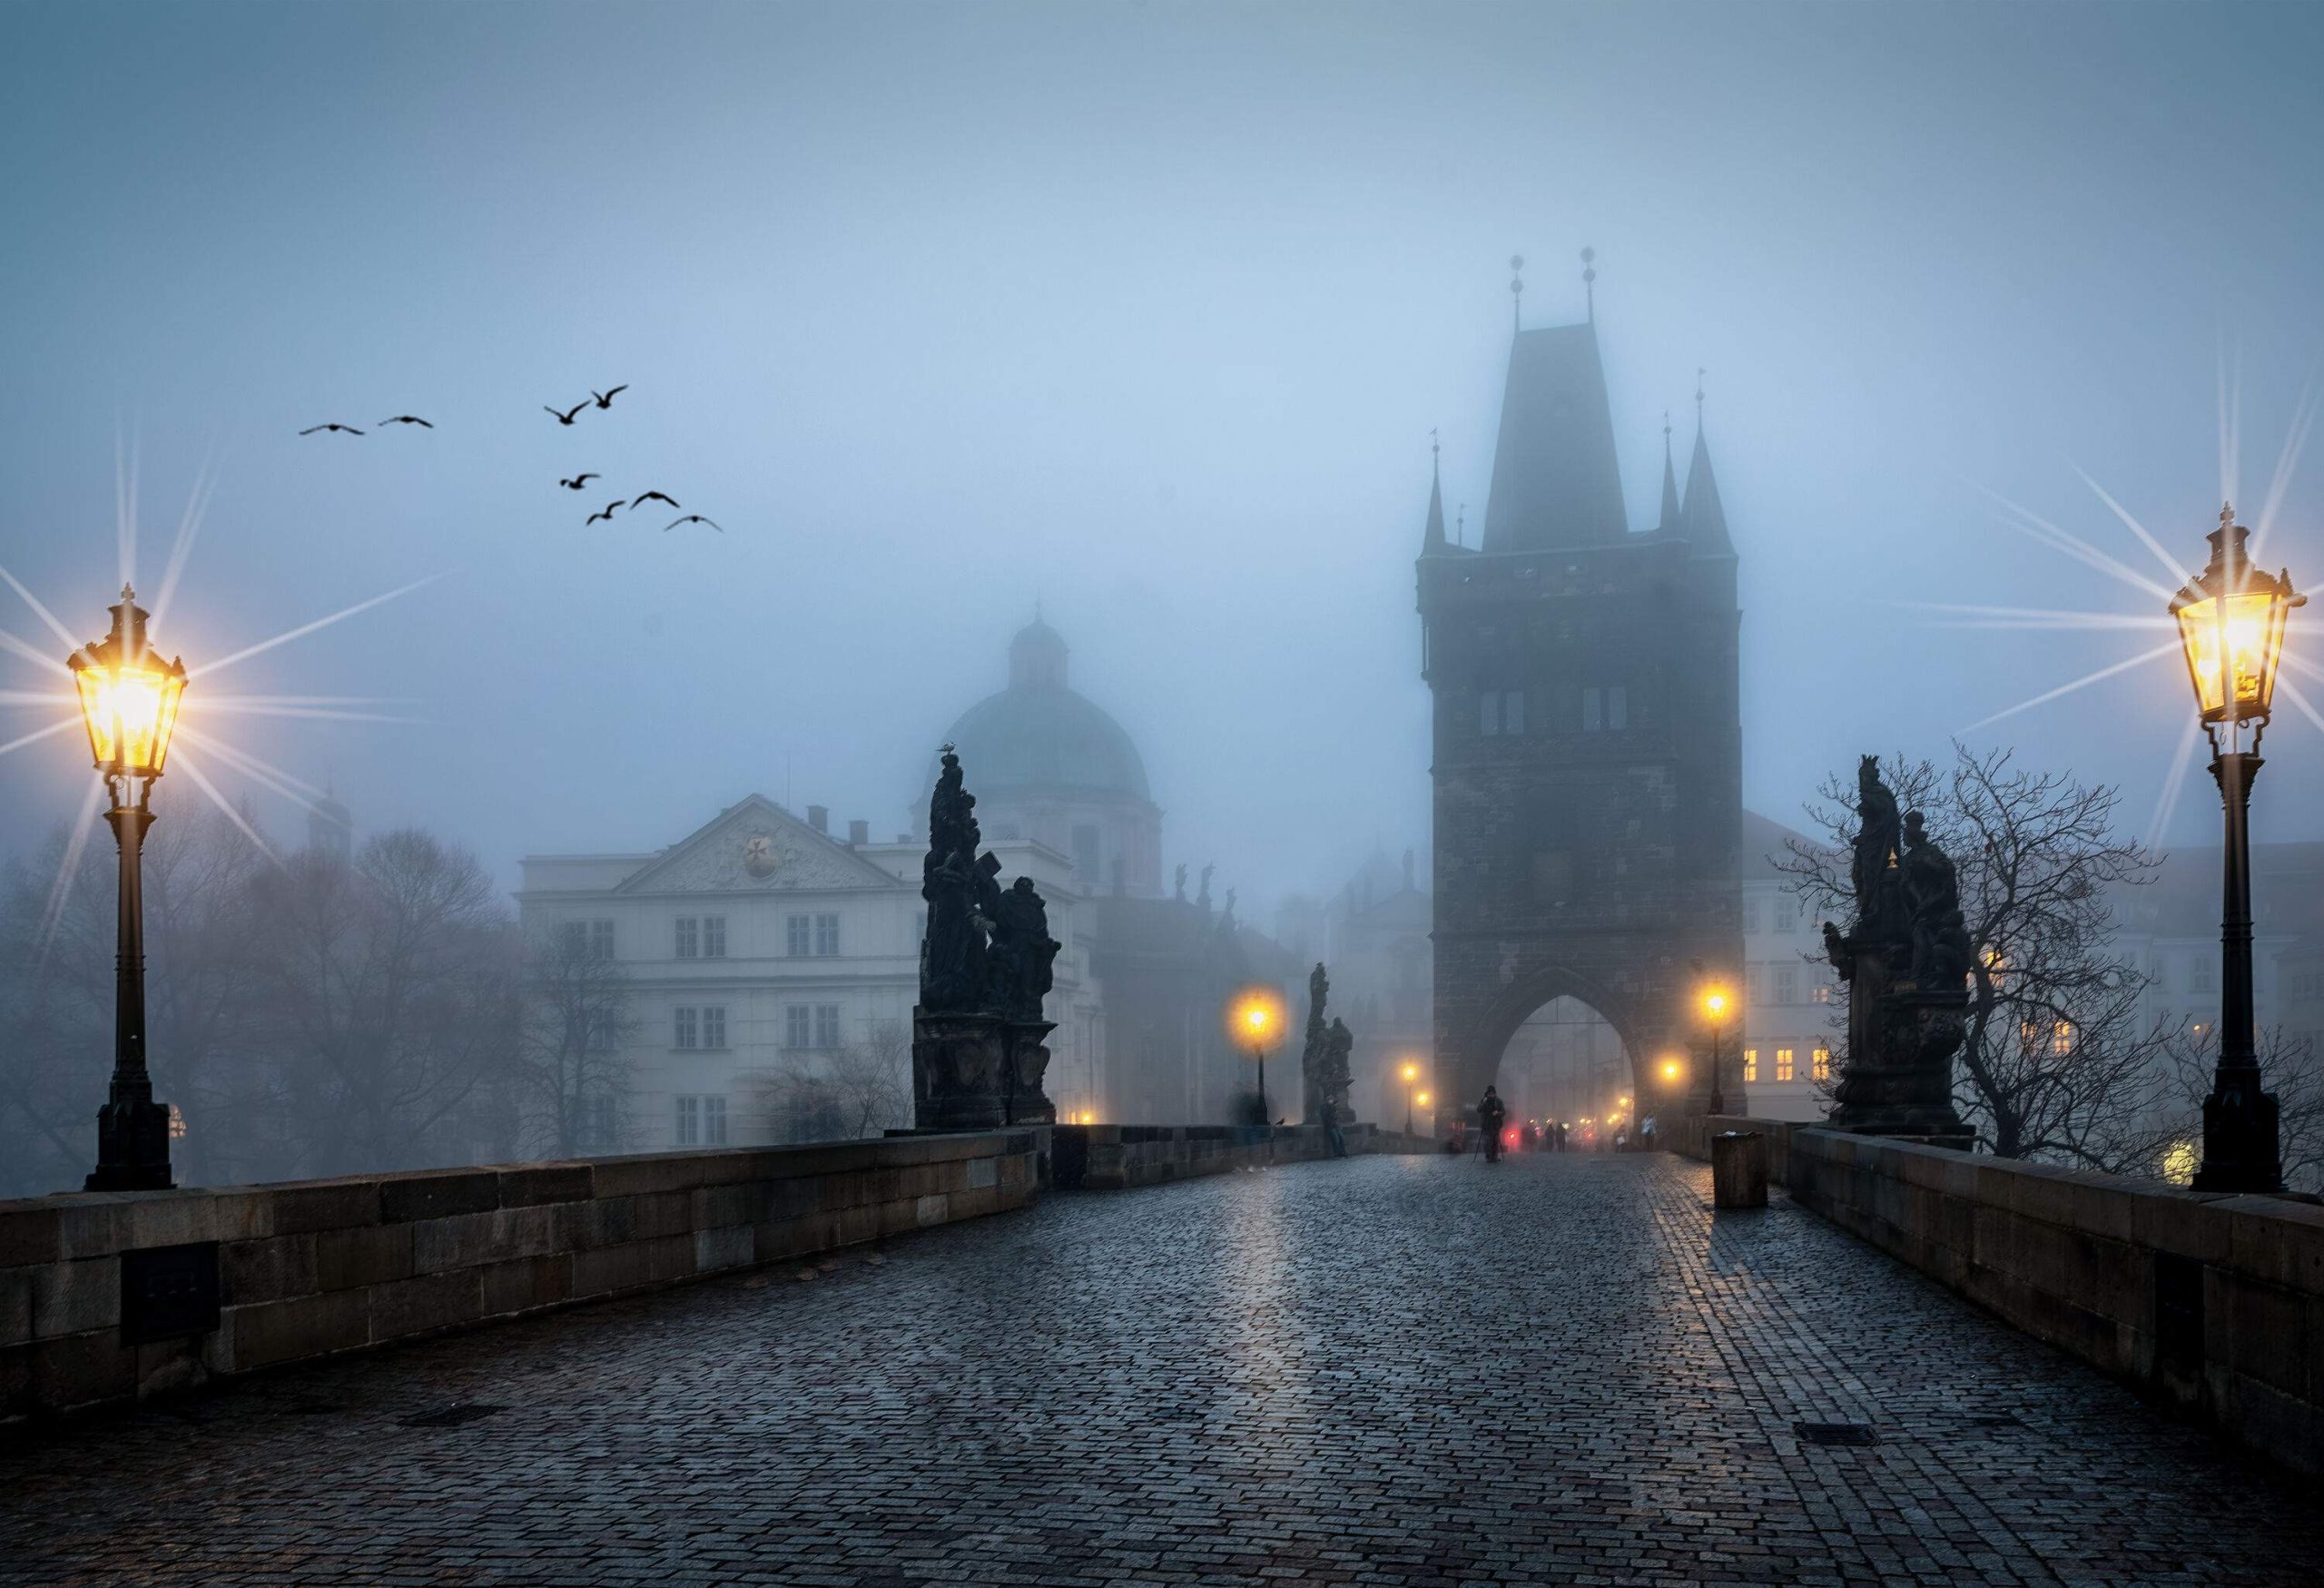 A medieval stone bridge with statues towards a castle and the city's old town on a foggy winter morning.